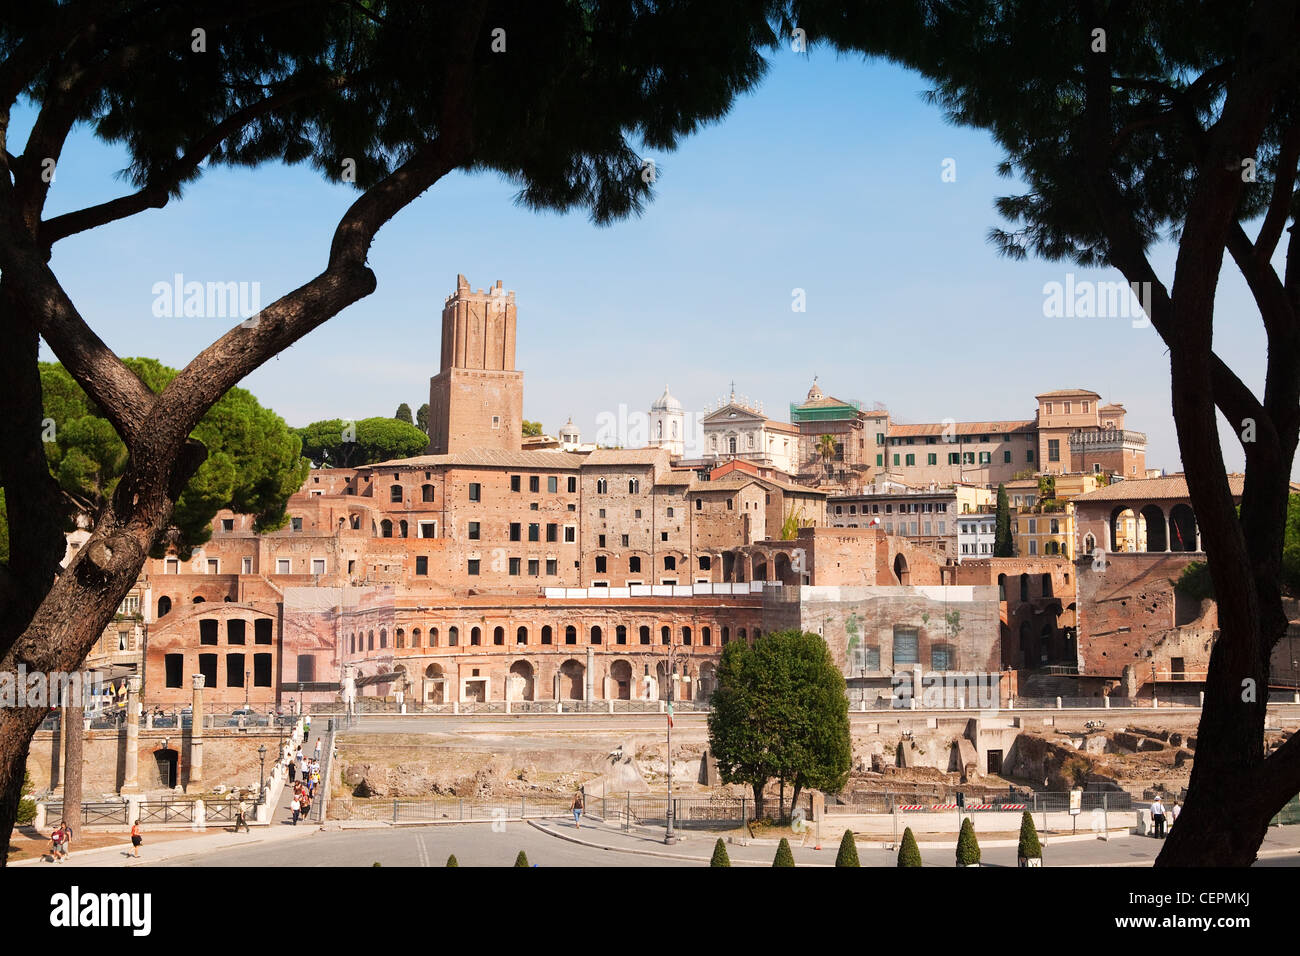 Pictoresque view on antic Rome ruins, Italy Stock Photo